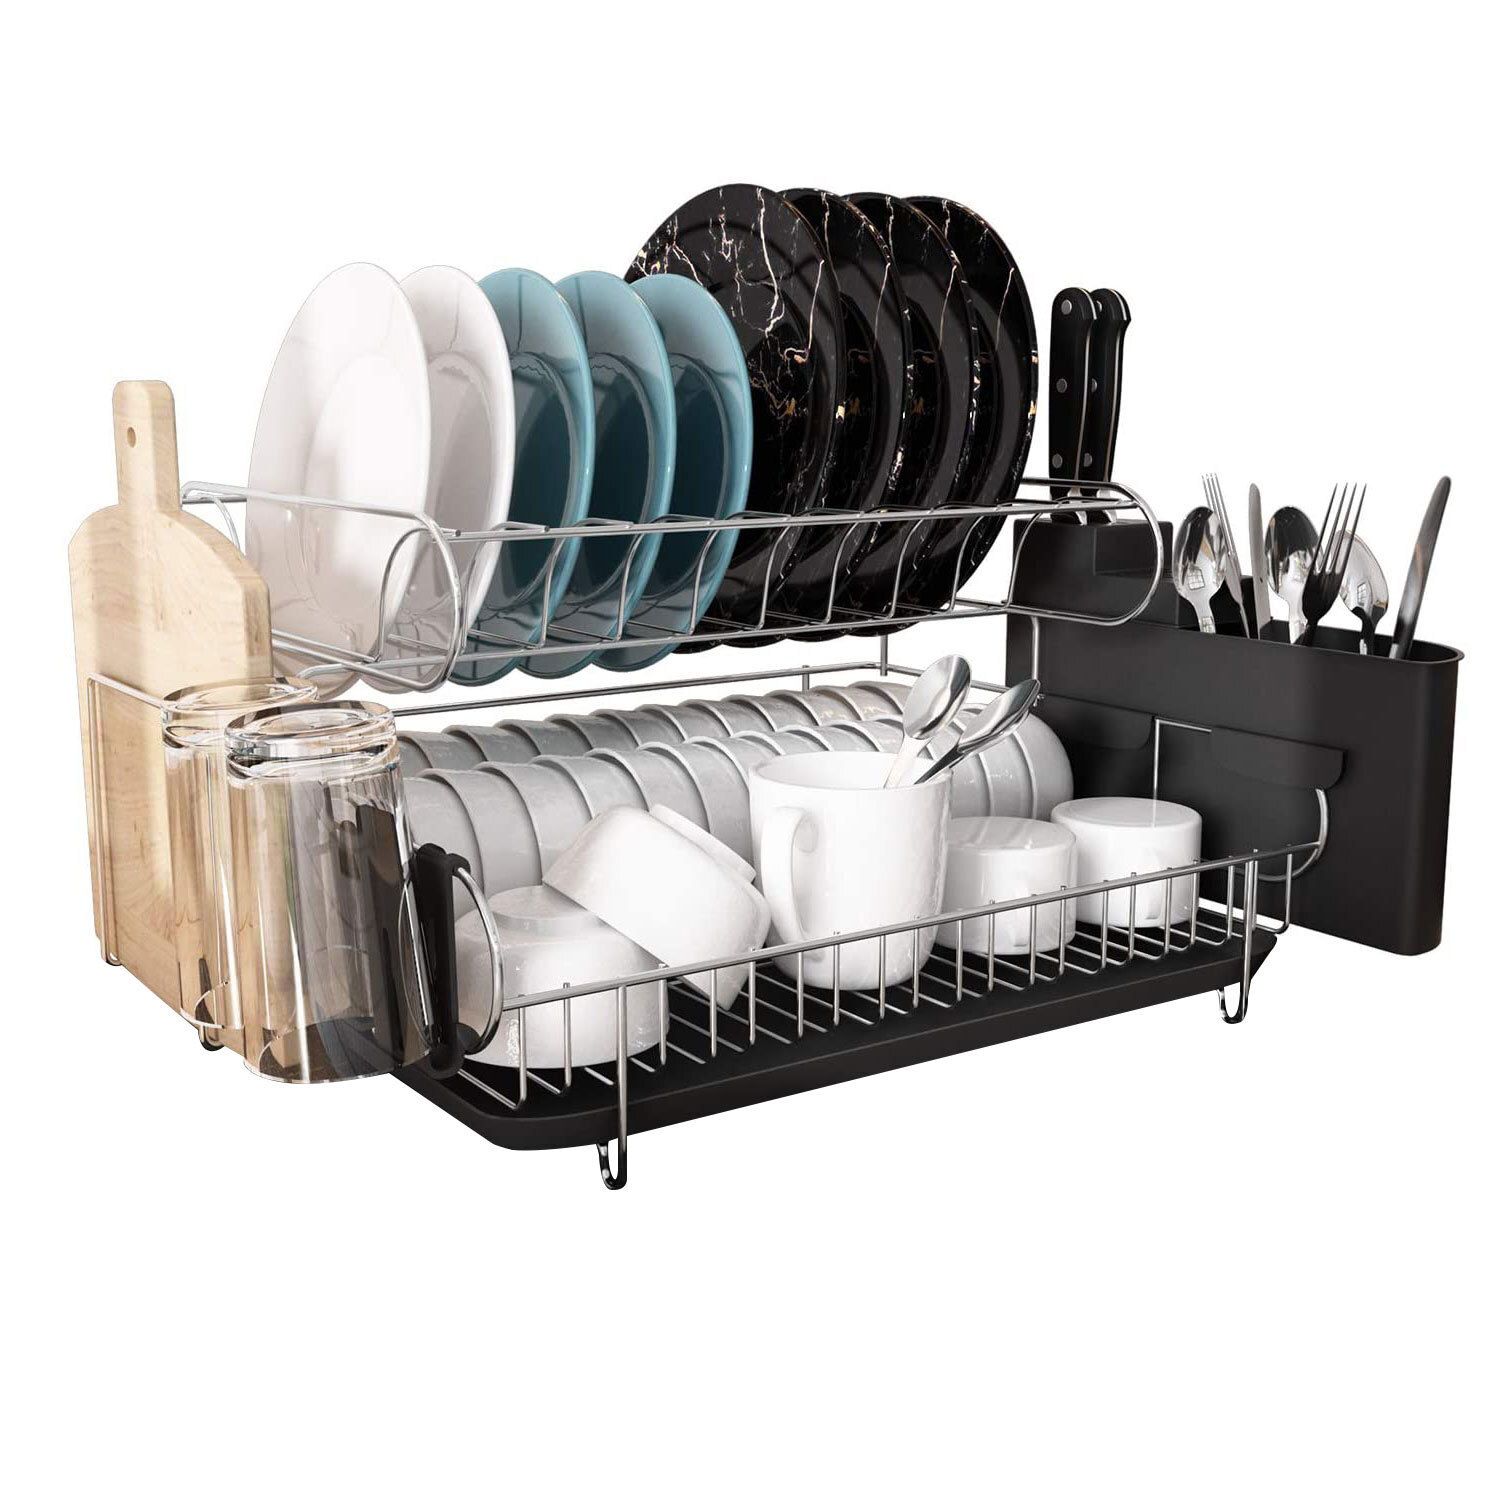 Aluminum Expandable Dish Drying Rack with Drainboard and Rotatable Drainage  Spout - Costway